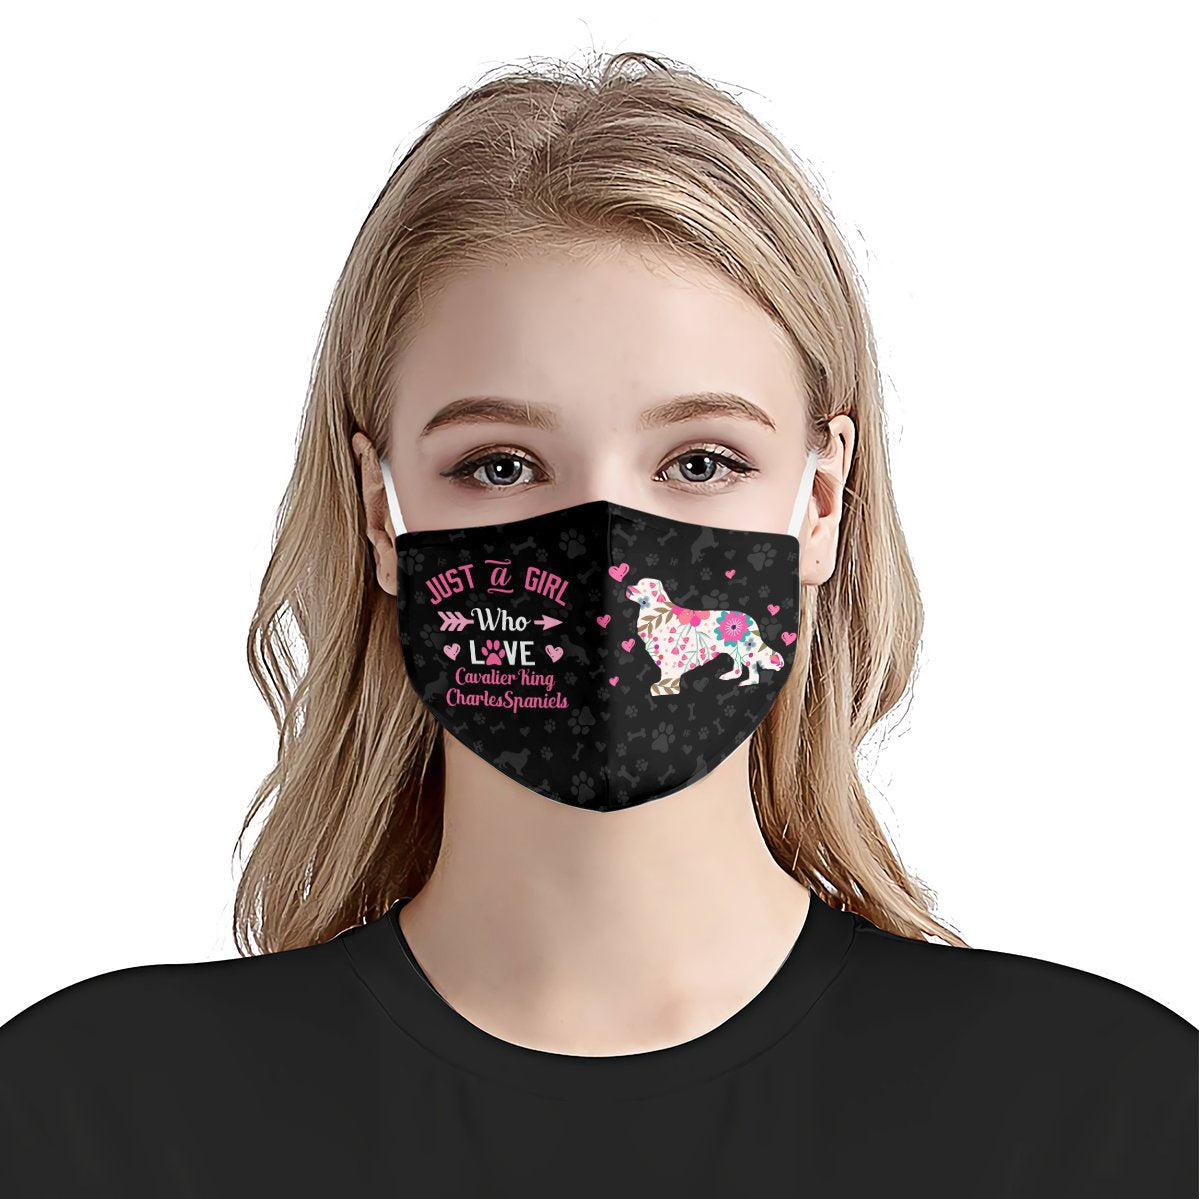 Just A Girl Who Loves Cavalier King Charles Spaniels EZ07 3107 Face Mask